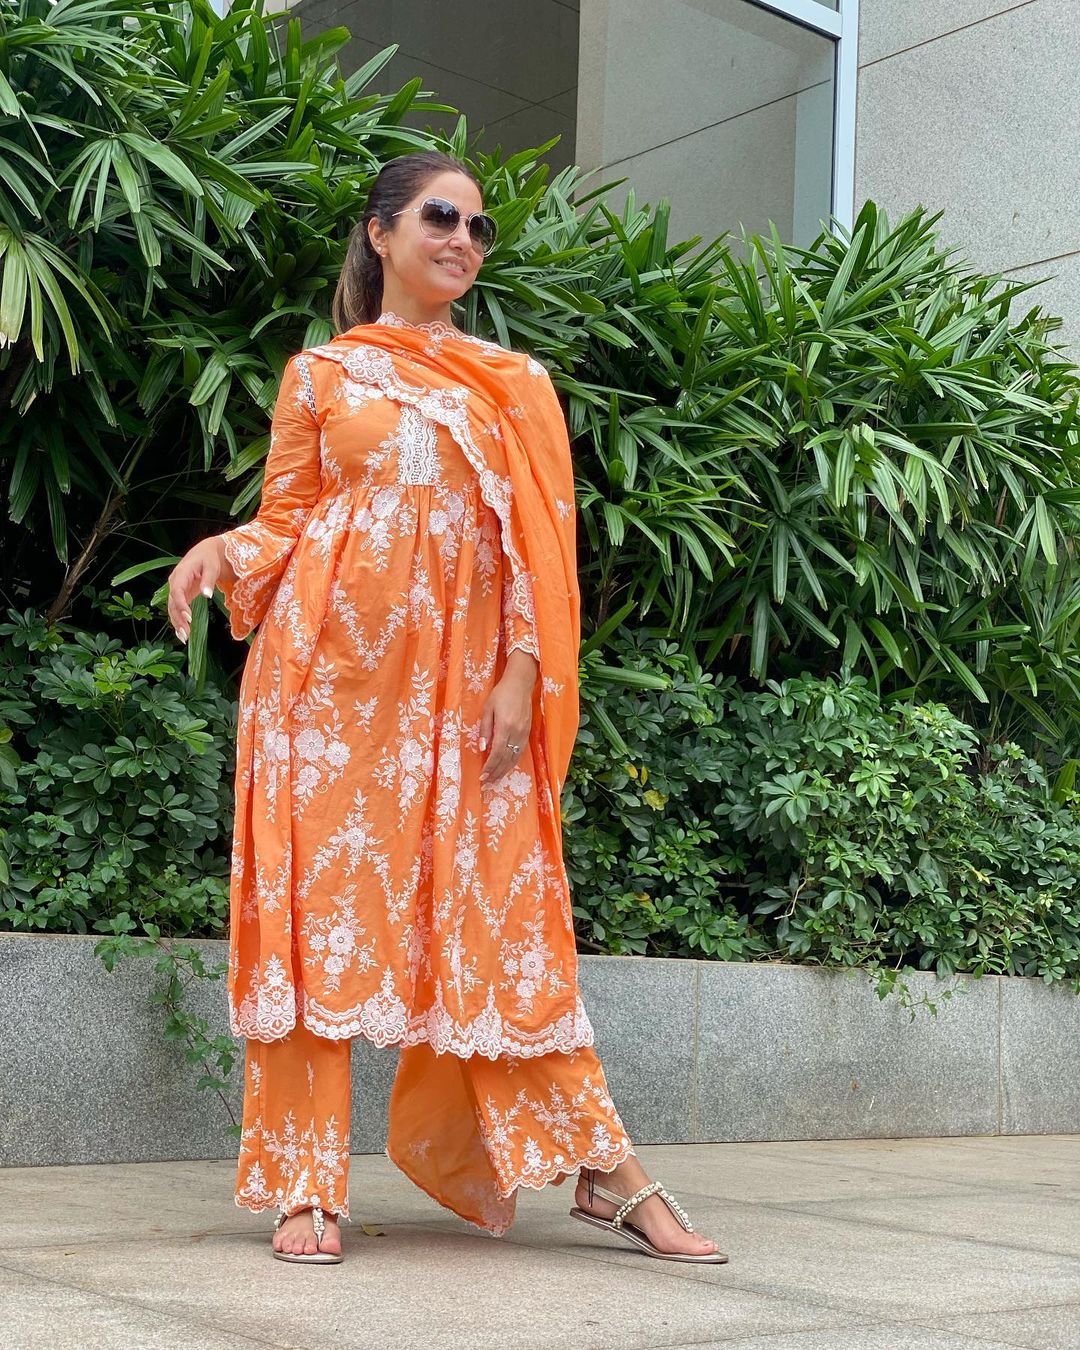 Hina Khan keeps it simple and classy in the orange embroidered suit.